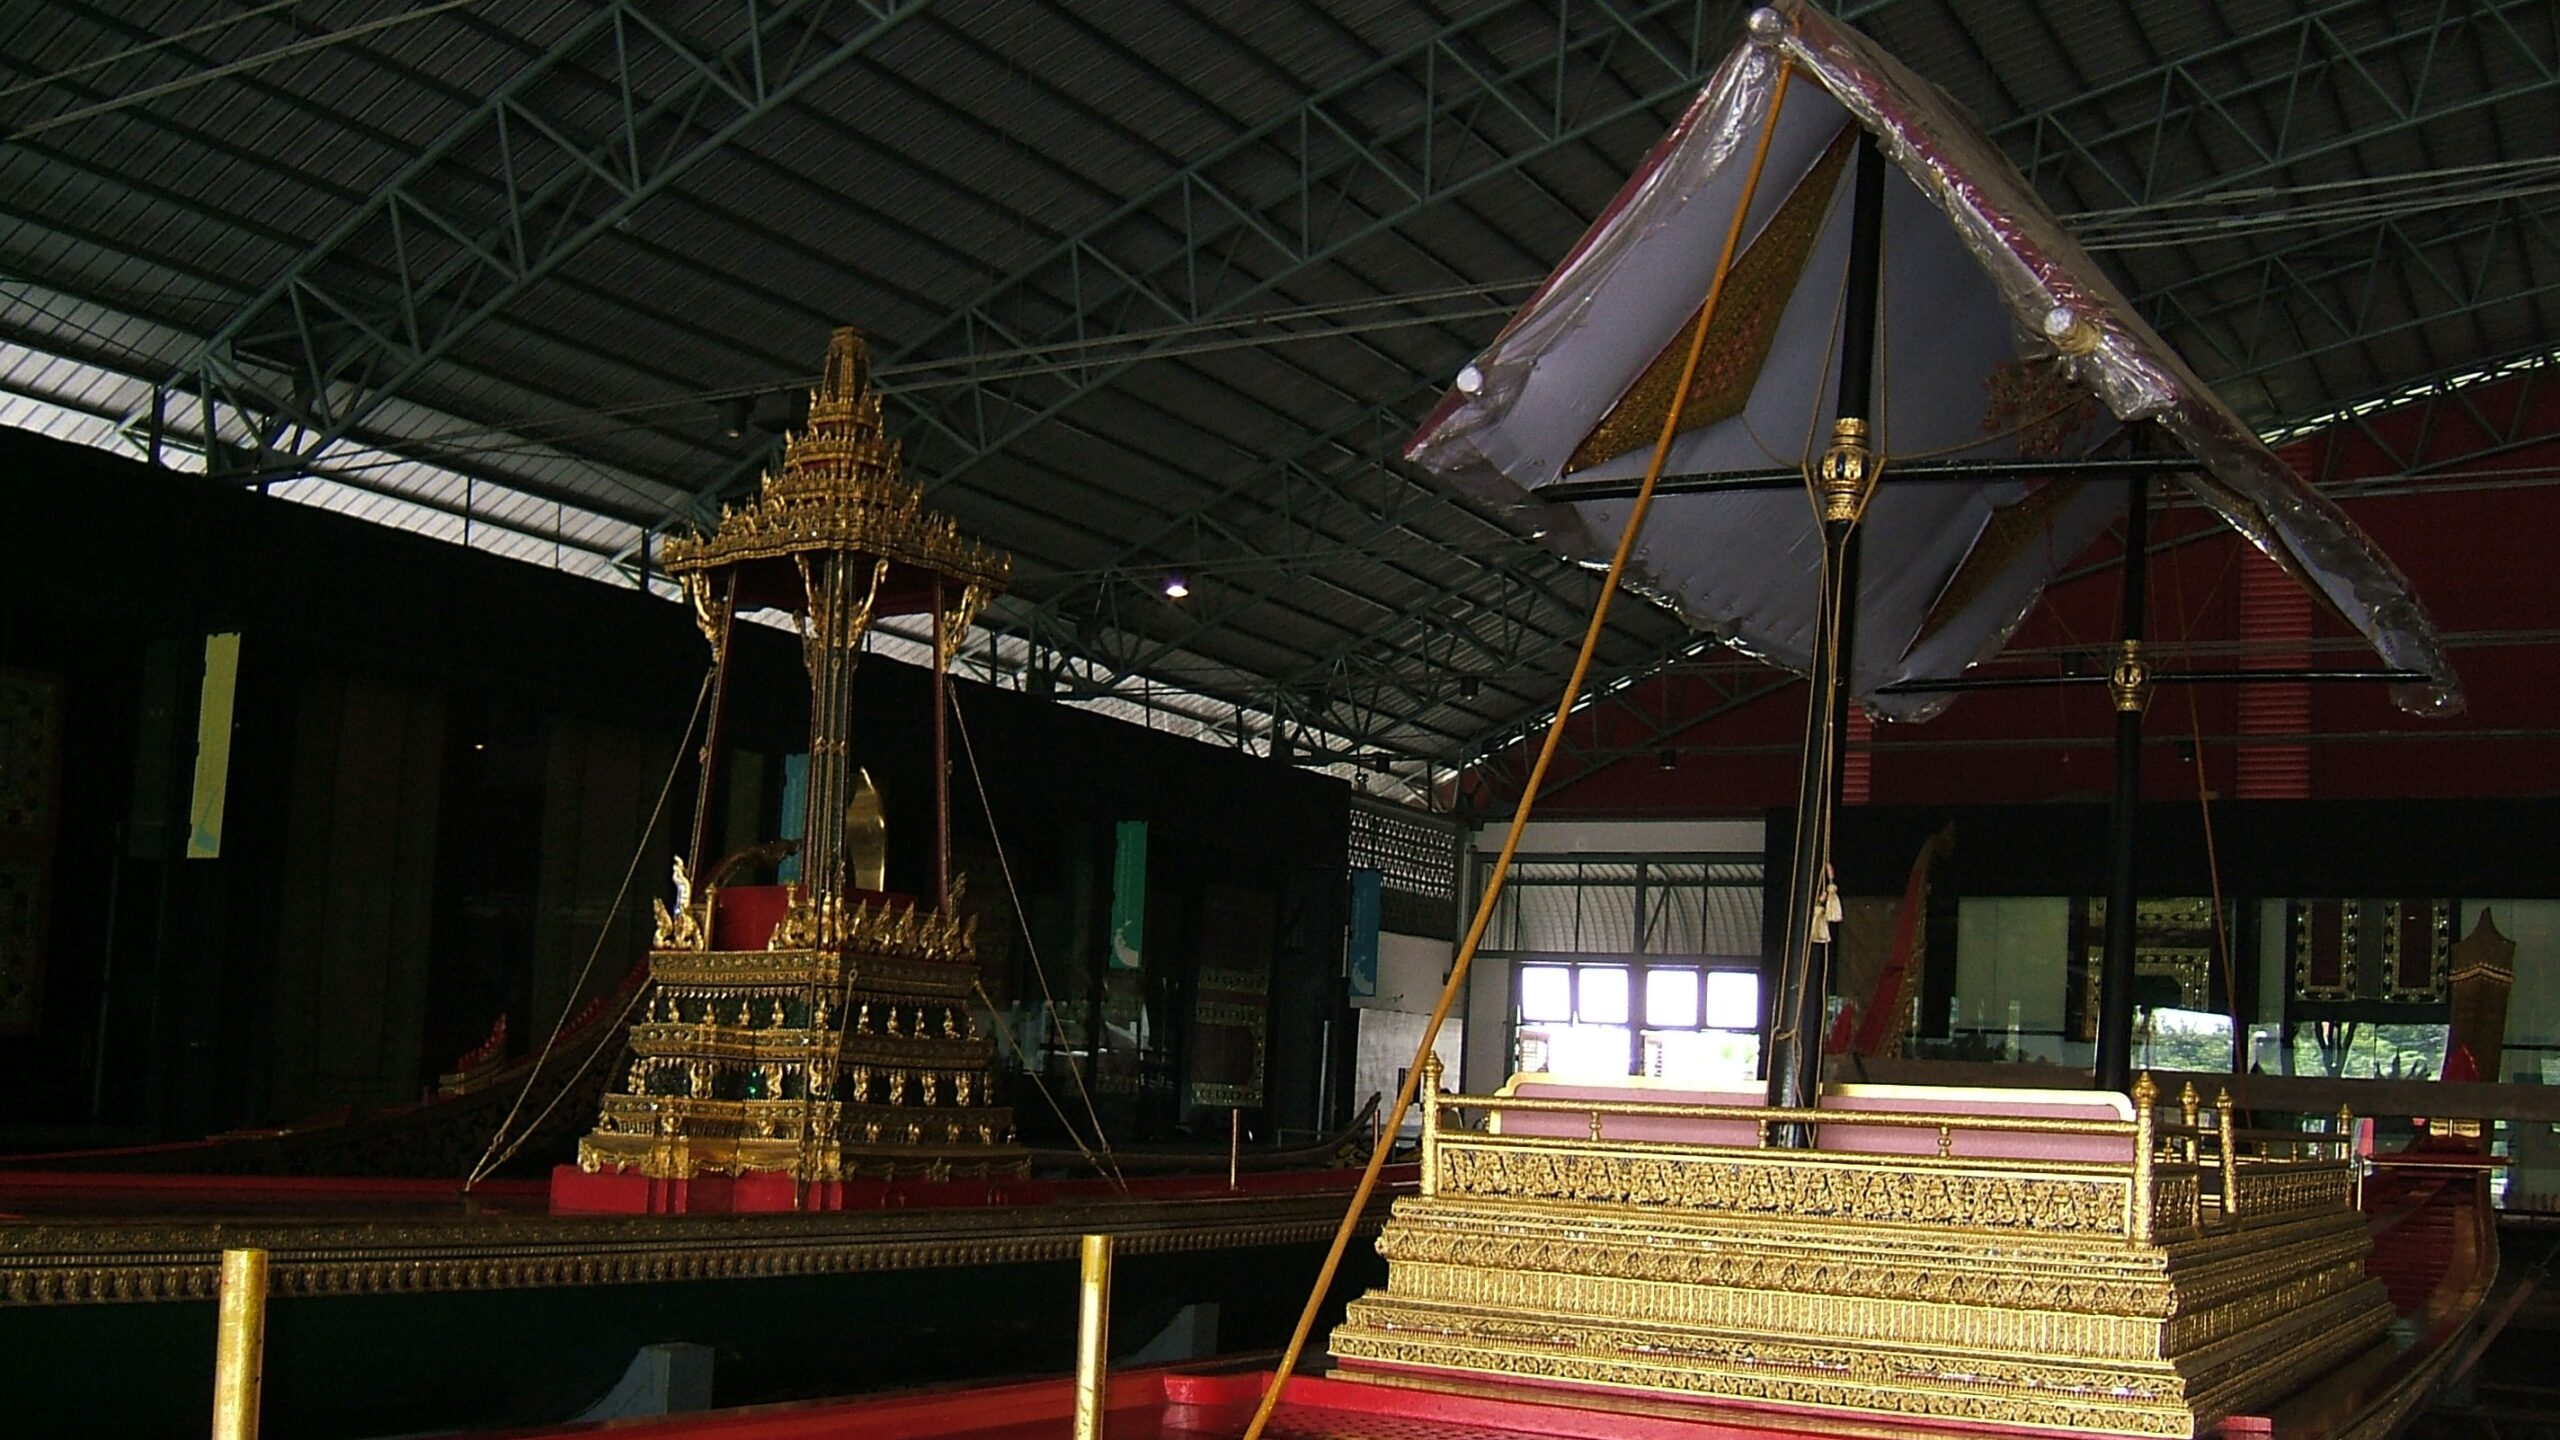 The National Museum of Royal Barges